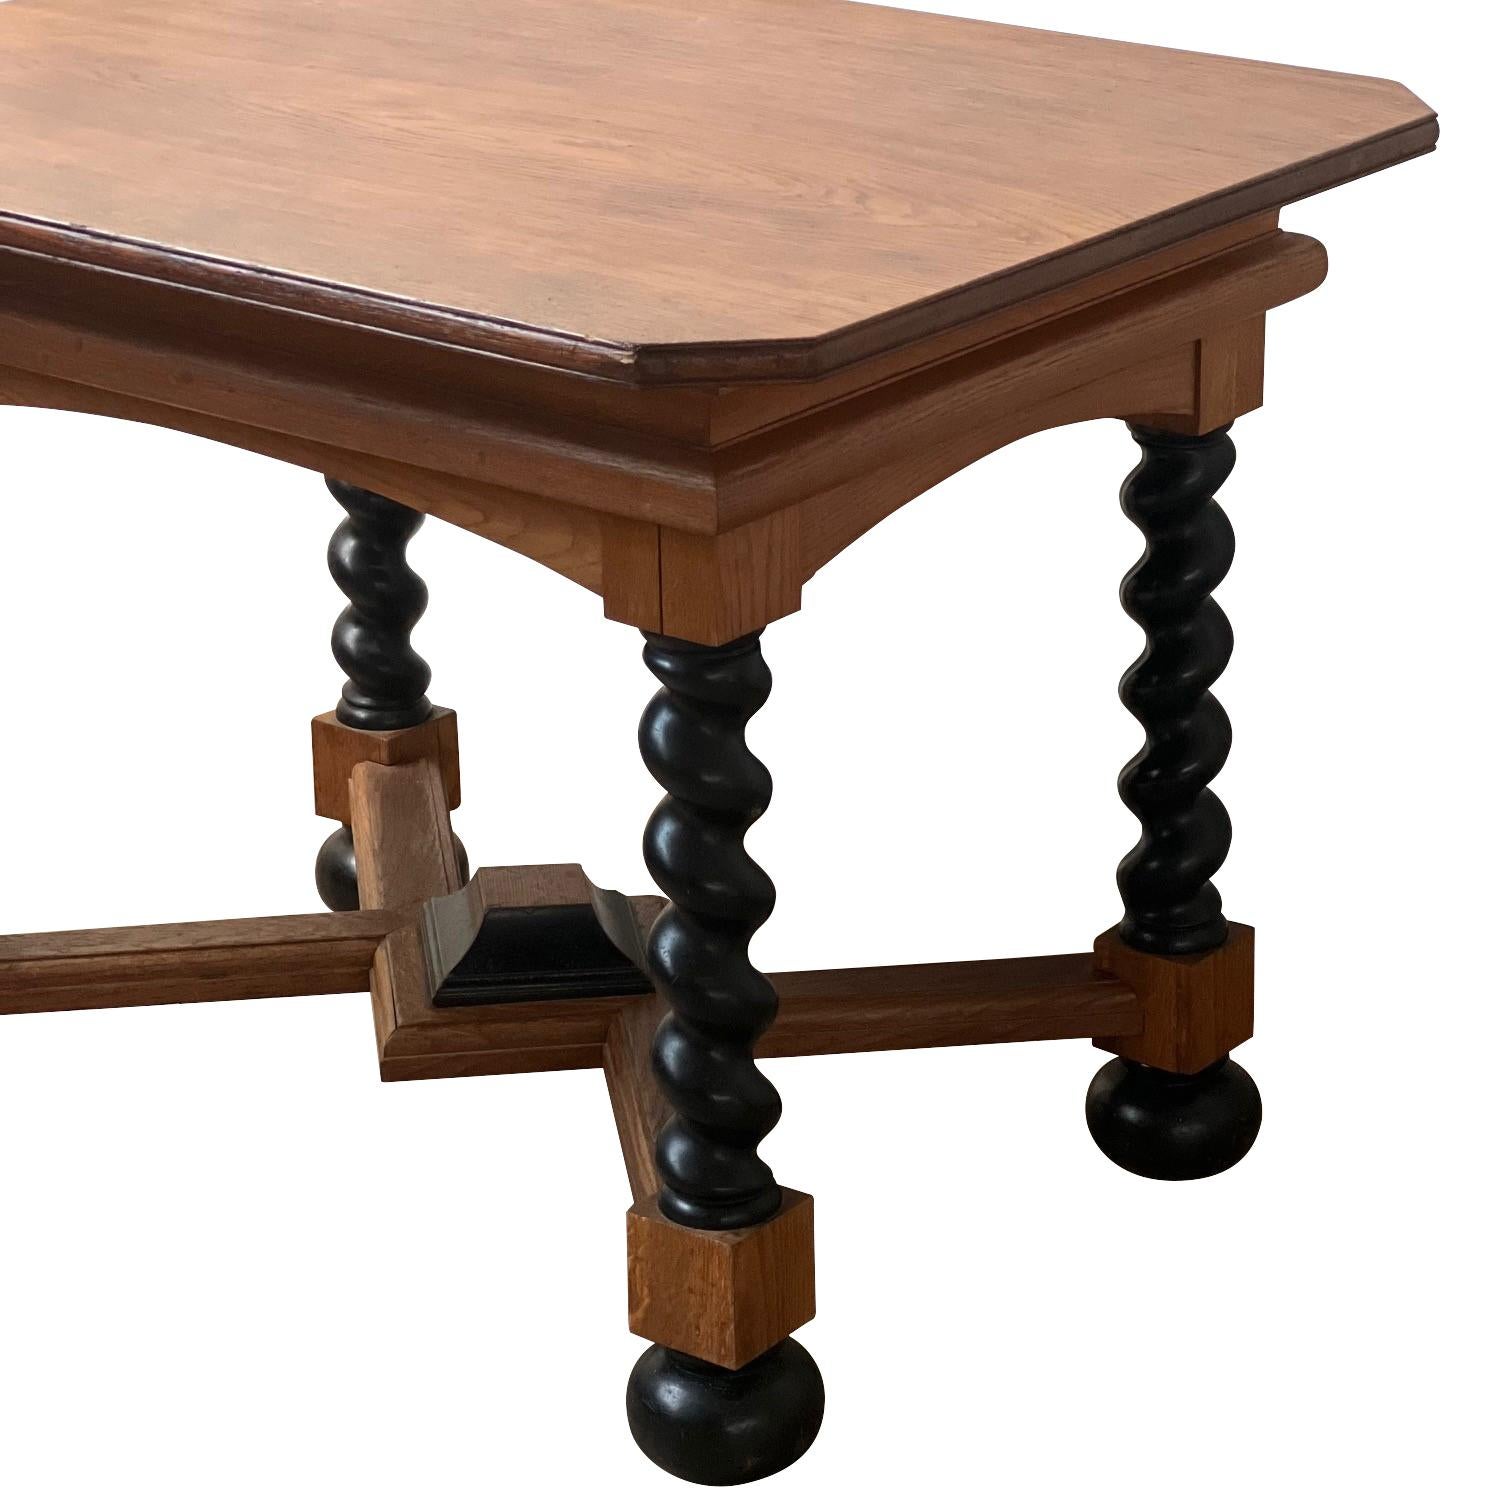 19th century Swedish ebonized turned leg center hall table.
Decorative unique finial at cross of stretchers.
Oak wood.
Ebonized doughnut shaped footing
Can also be used as a small dining or end table.
 